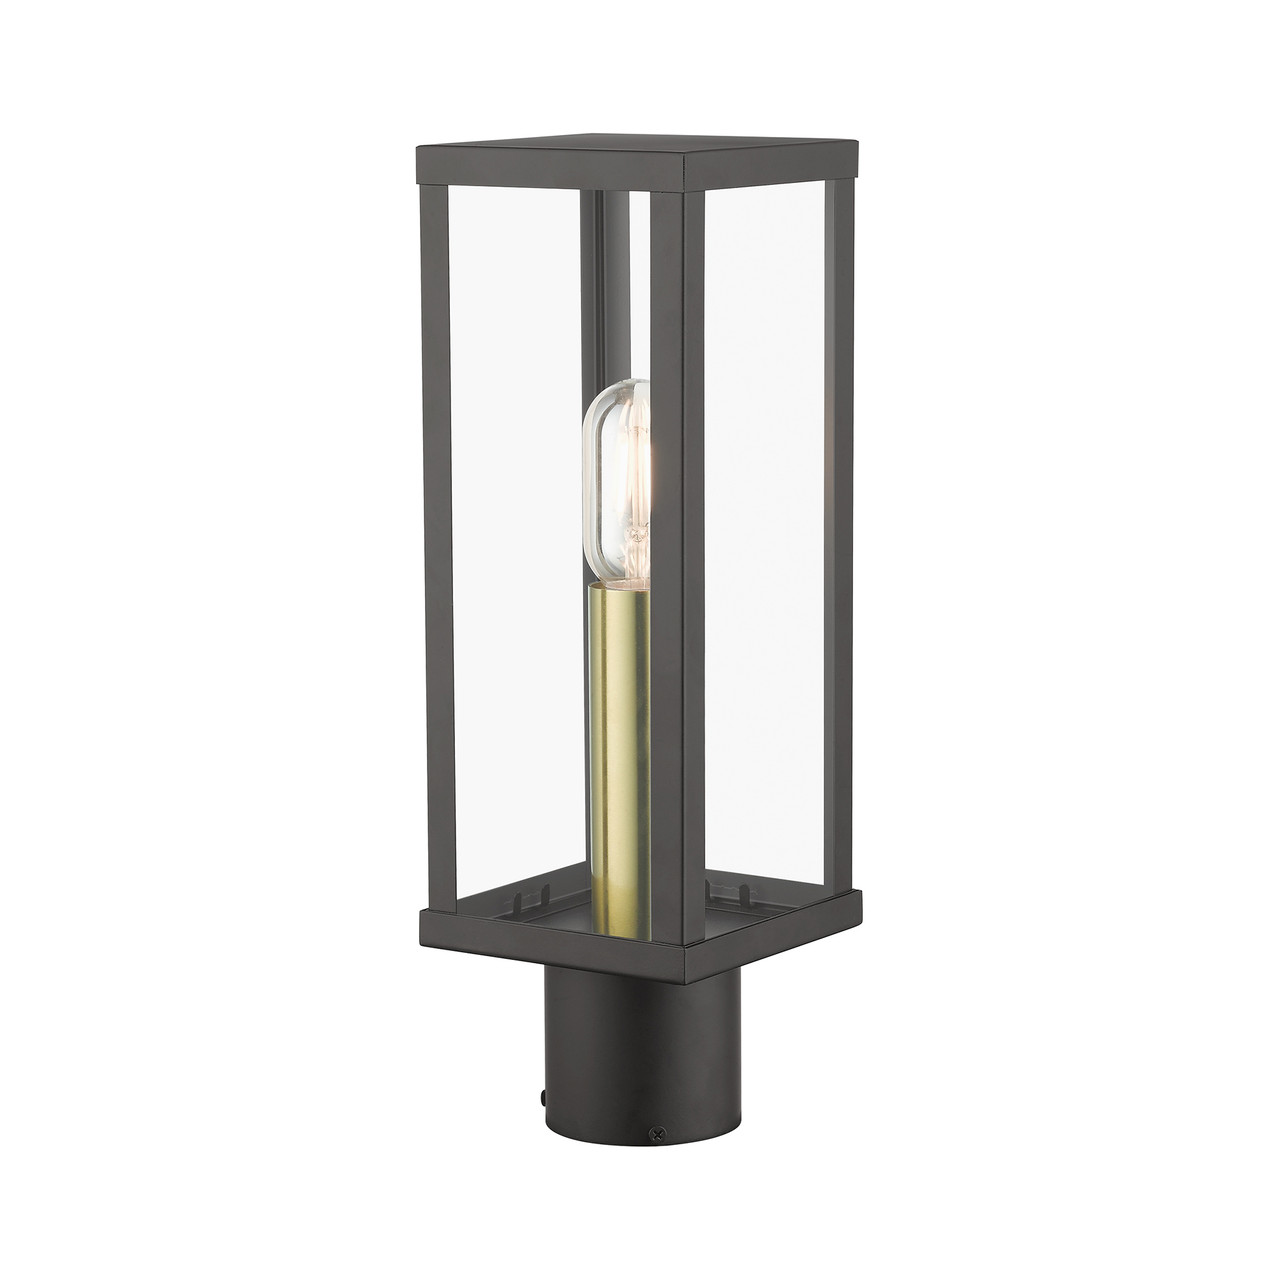 LIVEX LIGHTING 28034-07 1 Light Bronze Outdoor Post Top Lantern with Antique Gold Finish Accents